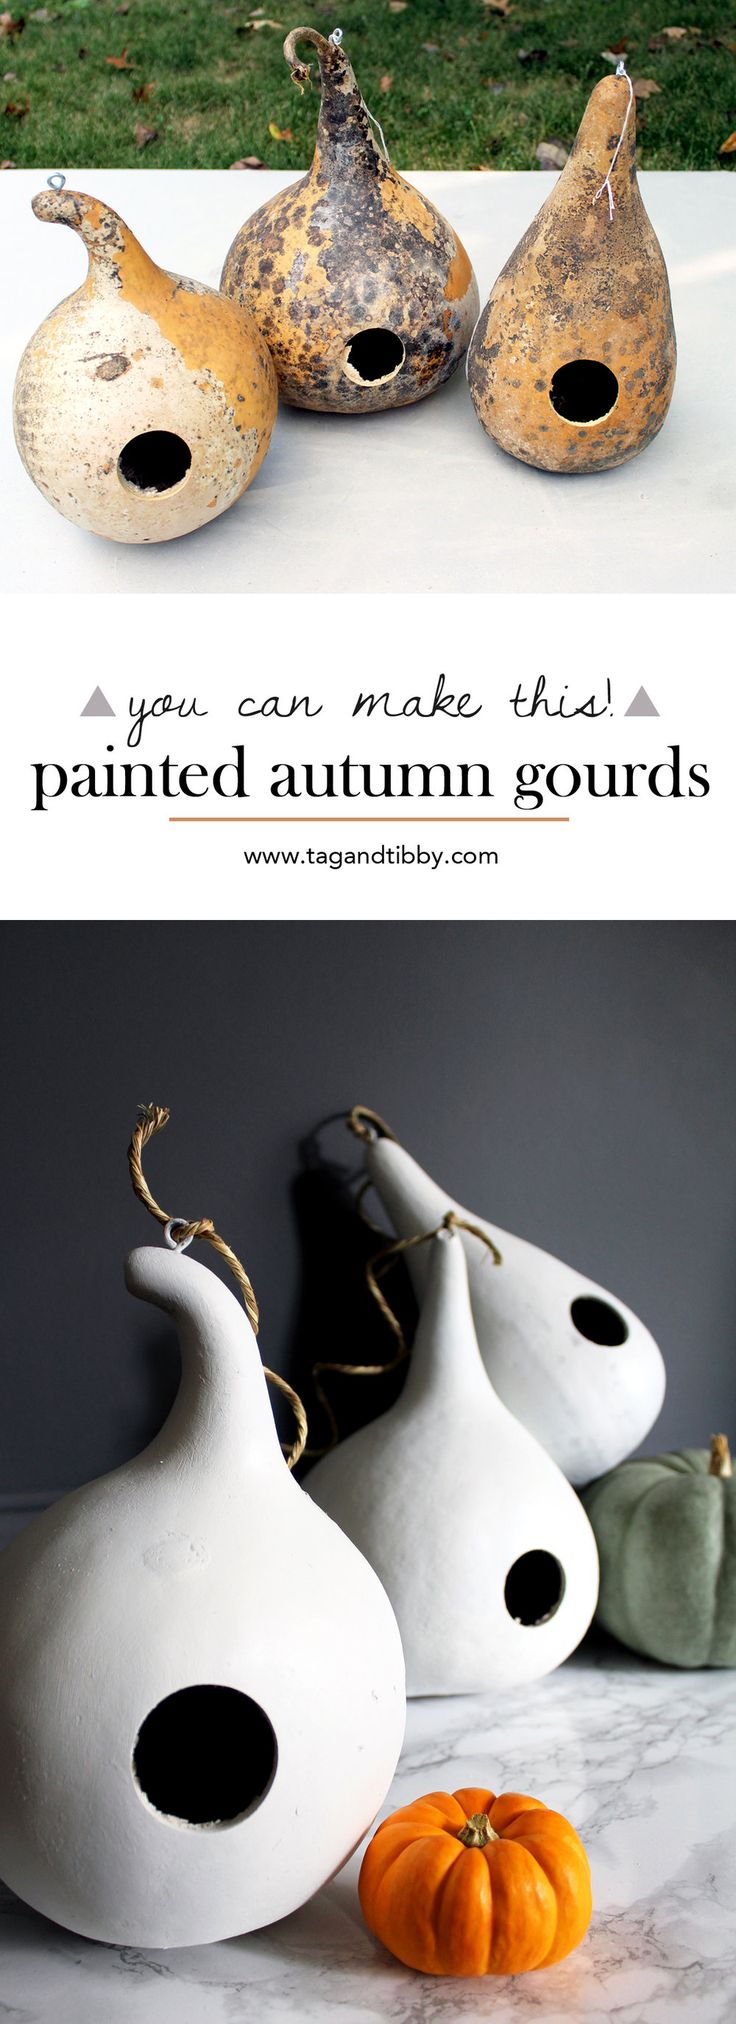 add style to your autumn gourds with white paint + grass string